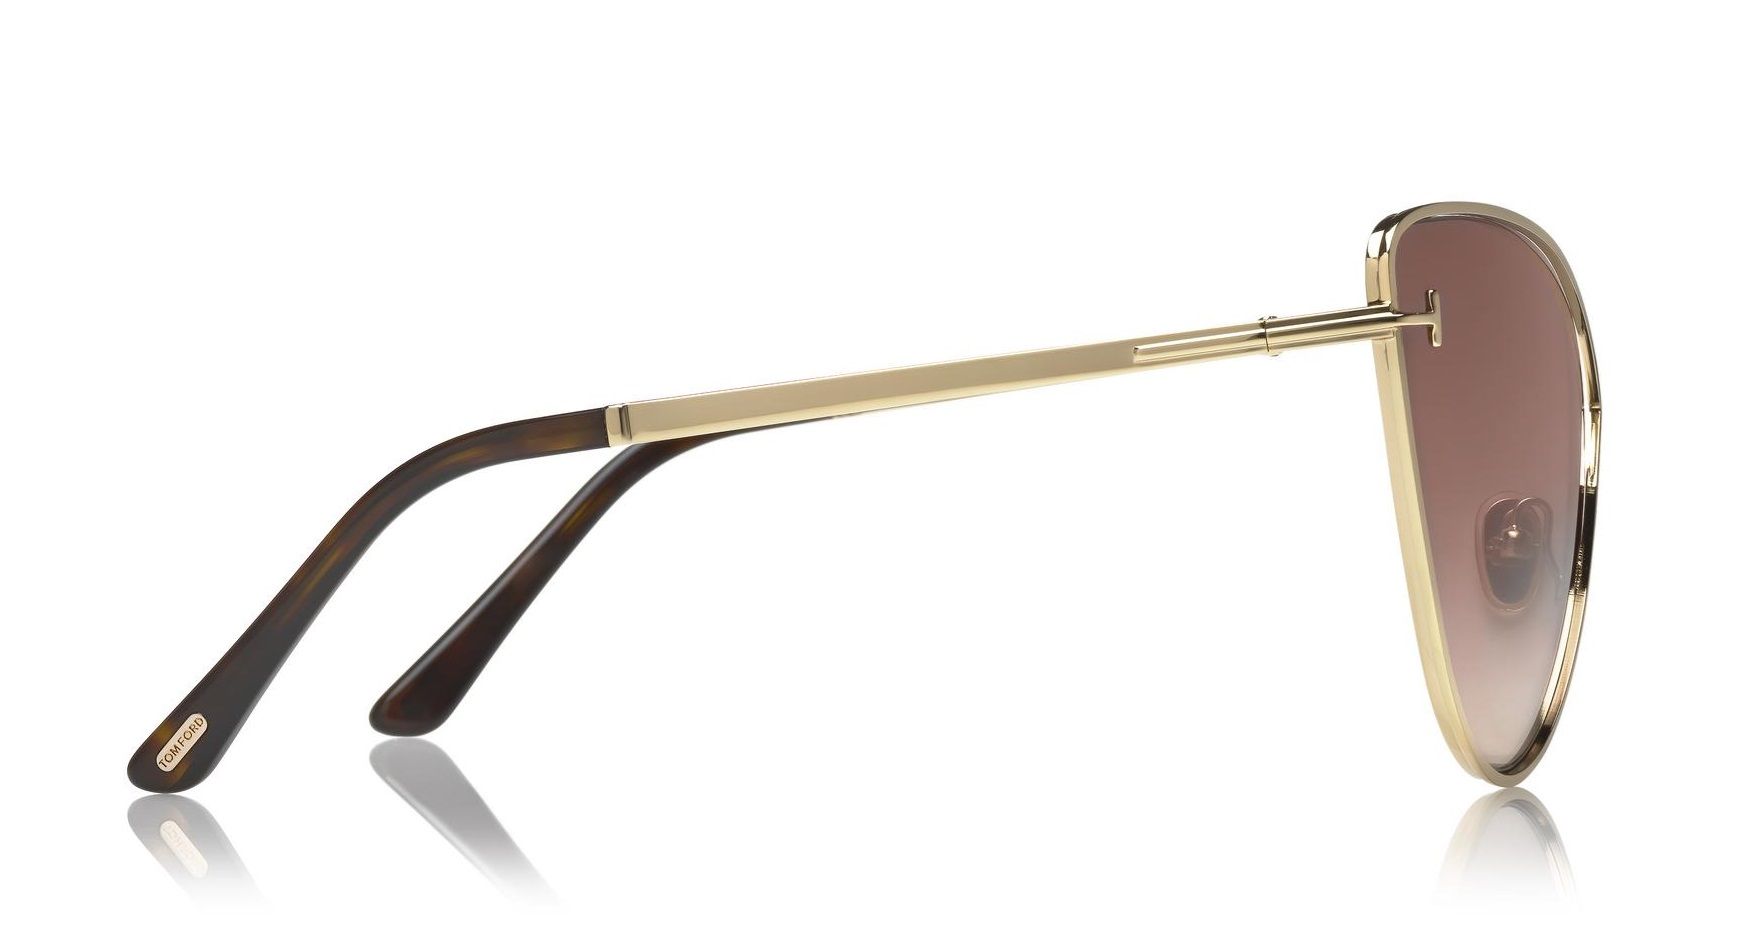  Tom Ford Leila Gold Brown sunglasses 